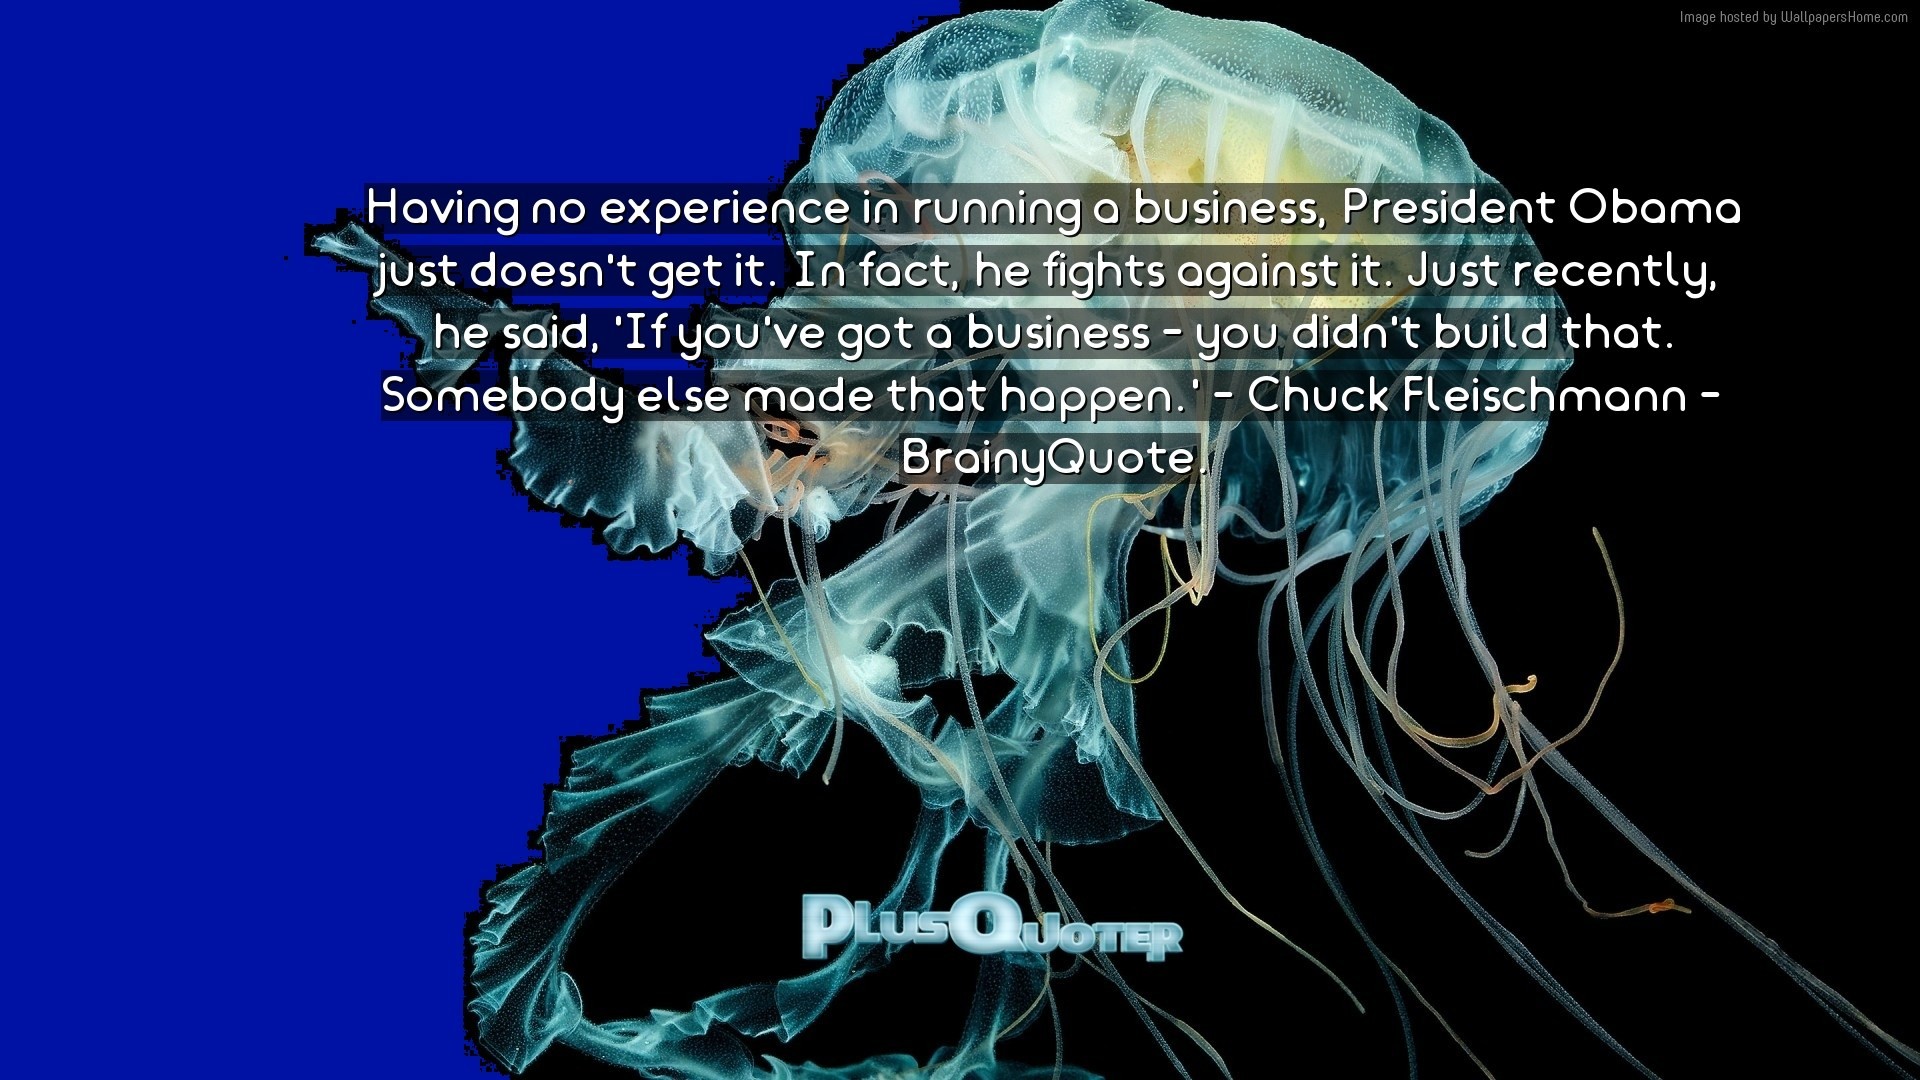 1920x1080 Download Wallpaper with inspirational Quotes- "Having no experience in  running a business, President